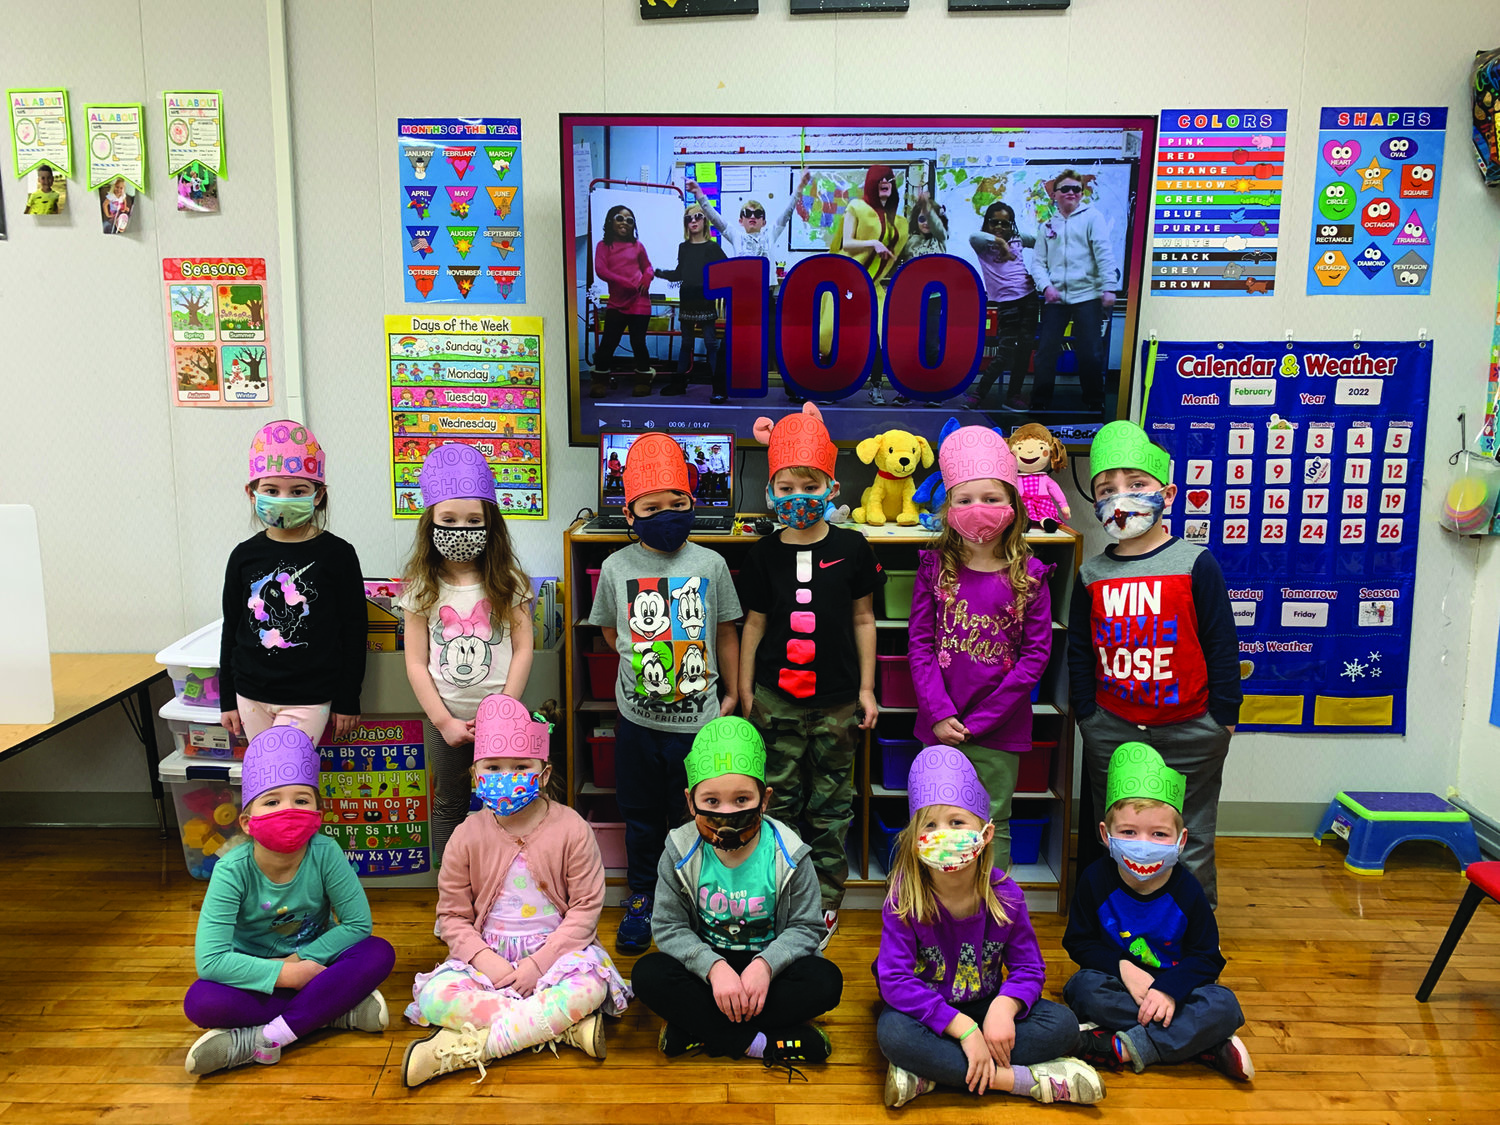 St. Isidore pre-k students celebrated 100 days together in many ways. They read “The Night Before the 100th Day,” counted to 100 together and danced to quite a few songs about 100.